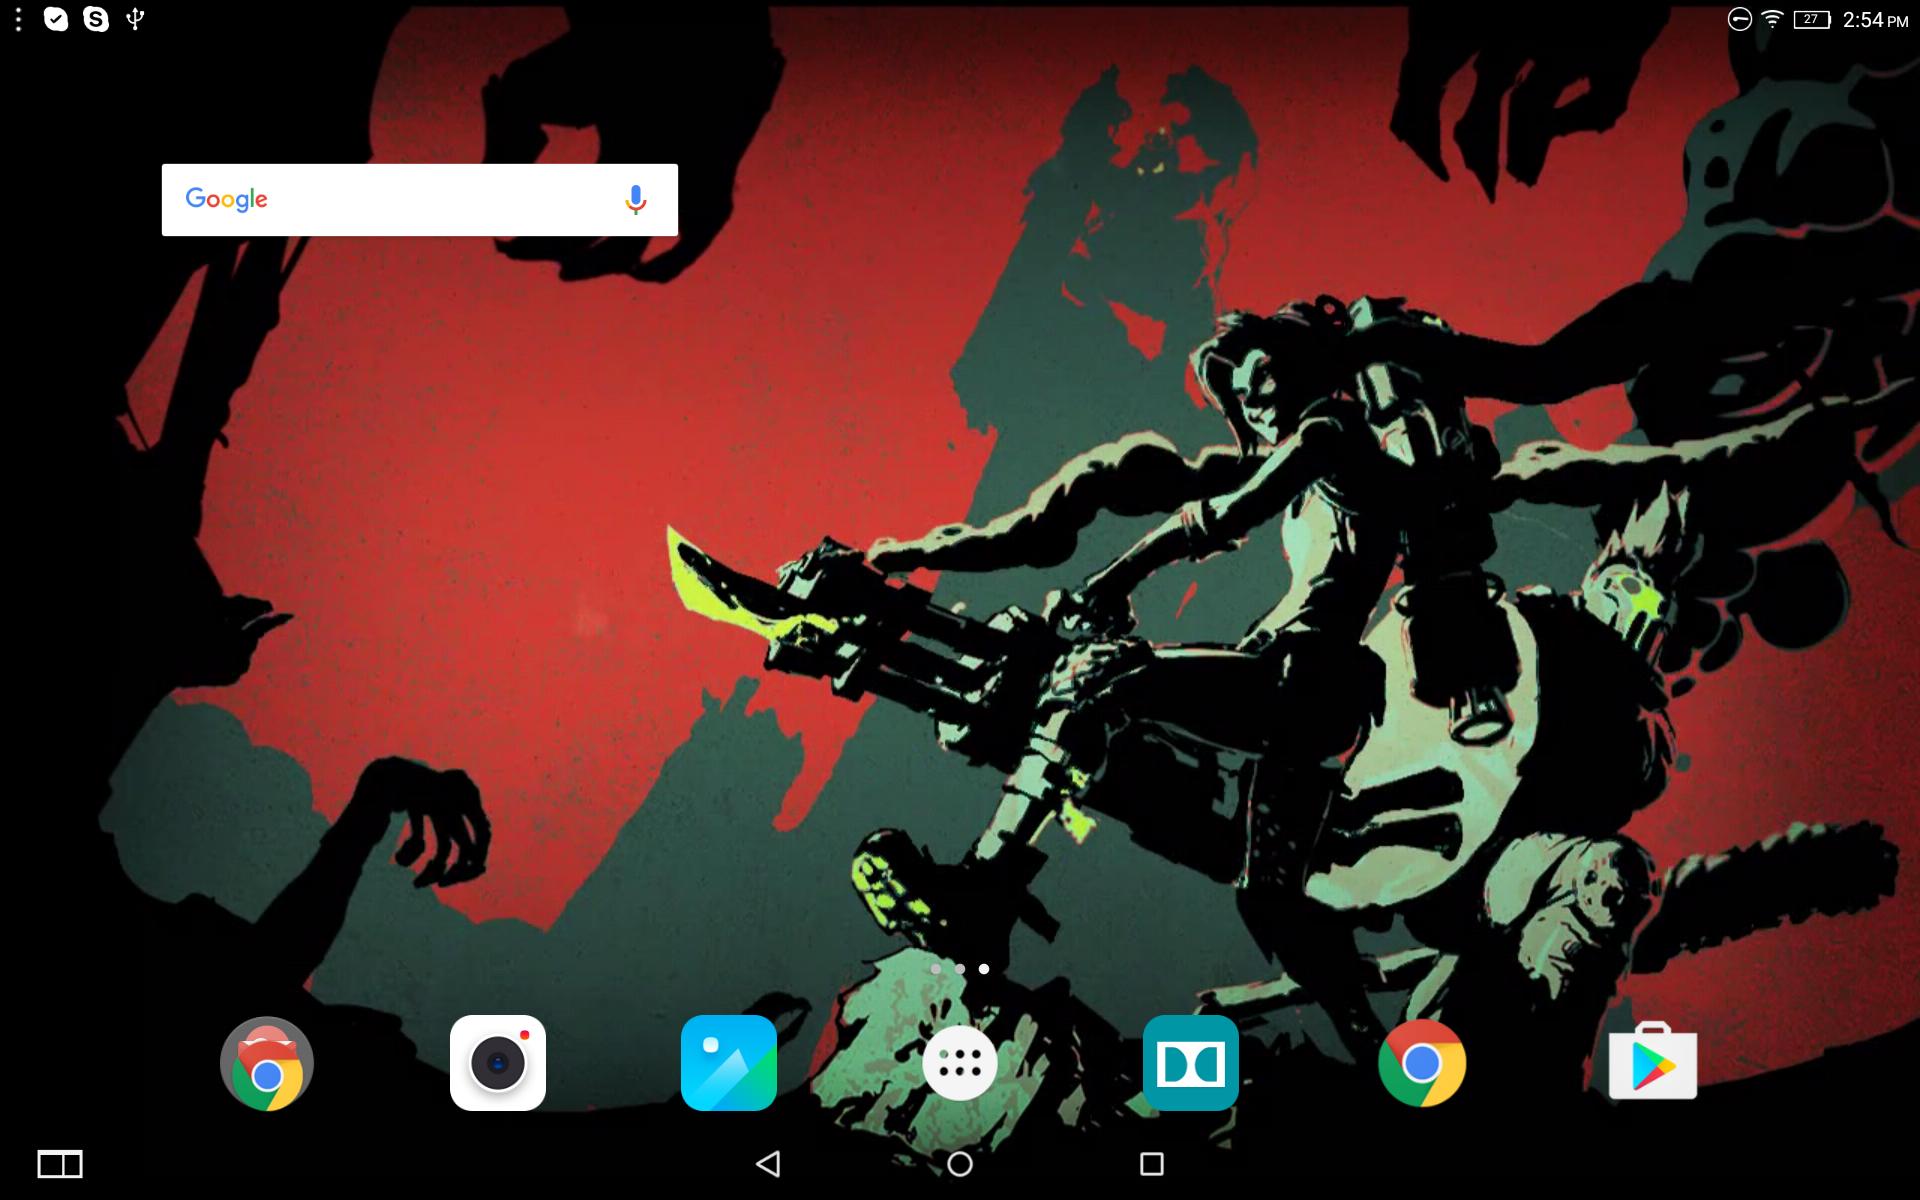 Jinx Hd Live Wallpapers For Android Apk Download Images, Photos, Reviews